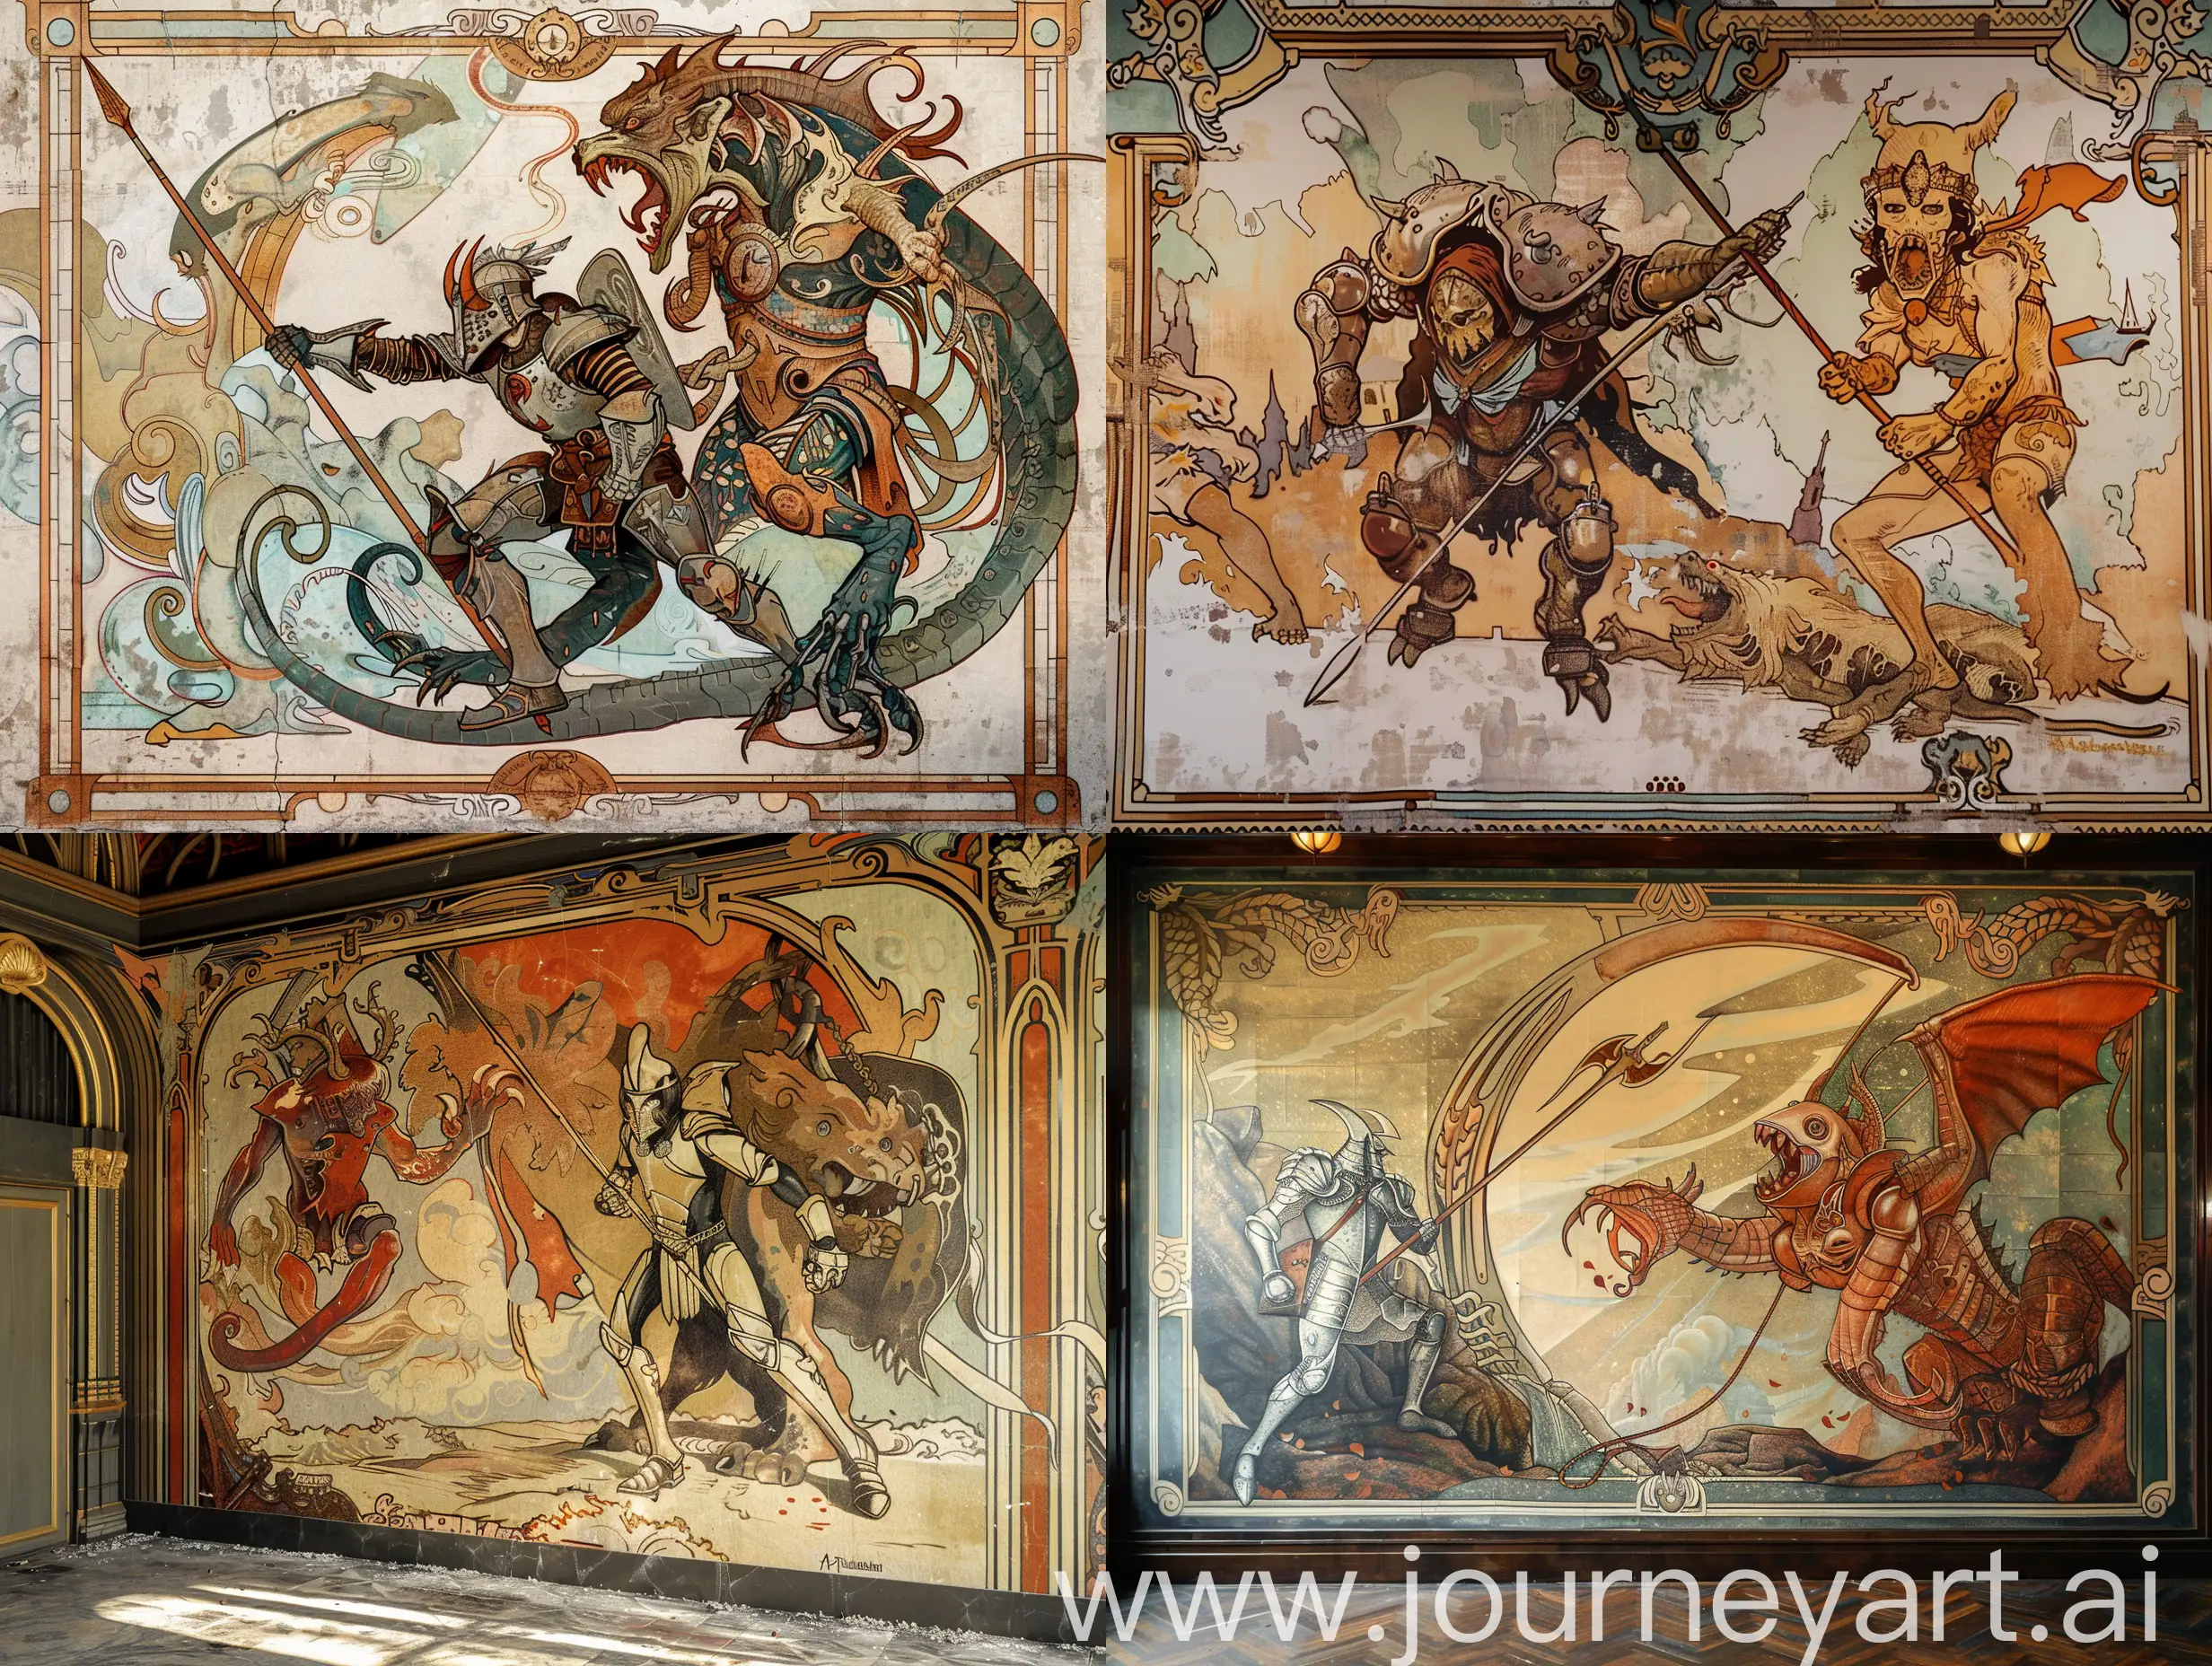 a mural on the wall depicting a battle scene of a warrior in armor with a spear against a two-headed scary monster. the mural on the wall. art nouveau style, Alphonse mucha style. fight, texture 8k.